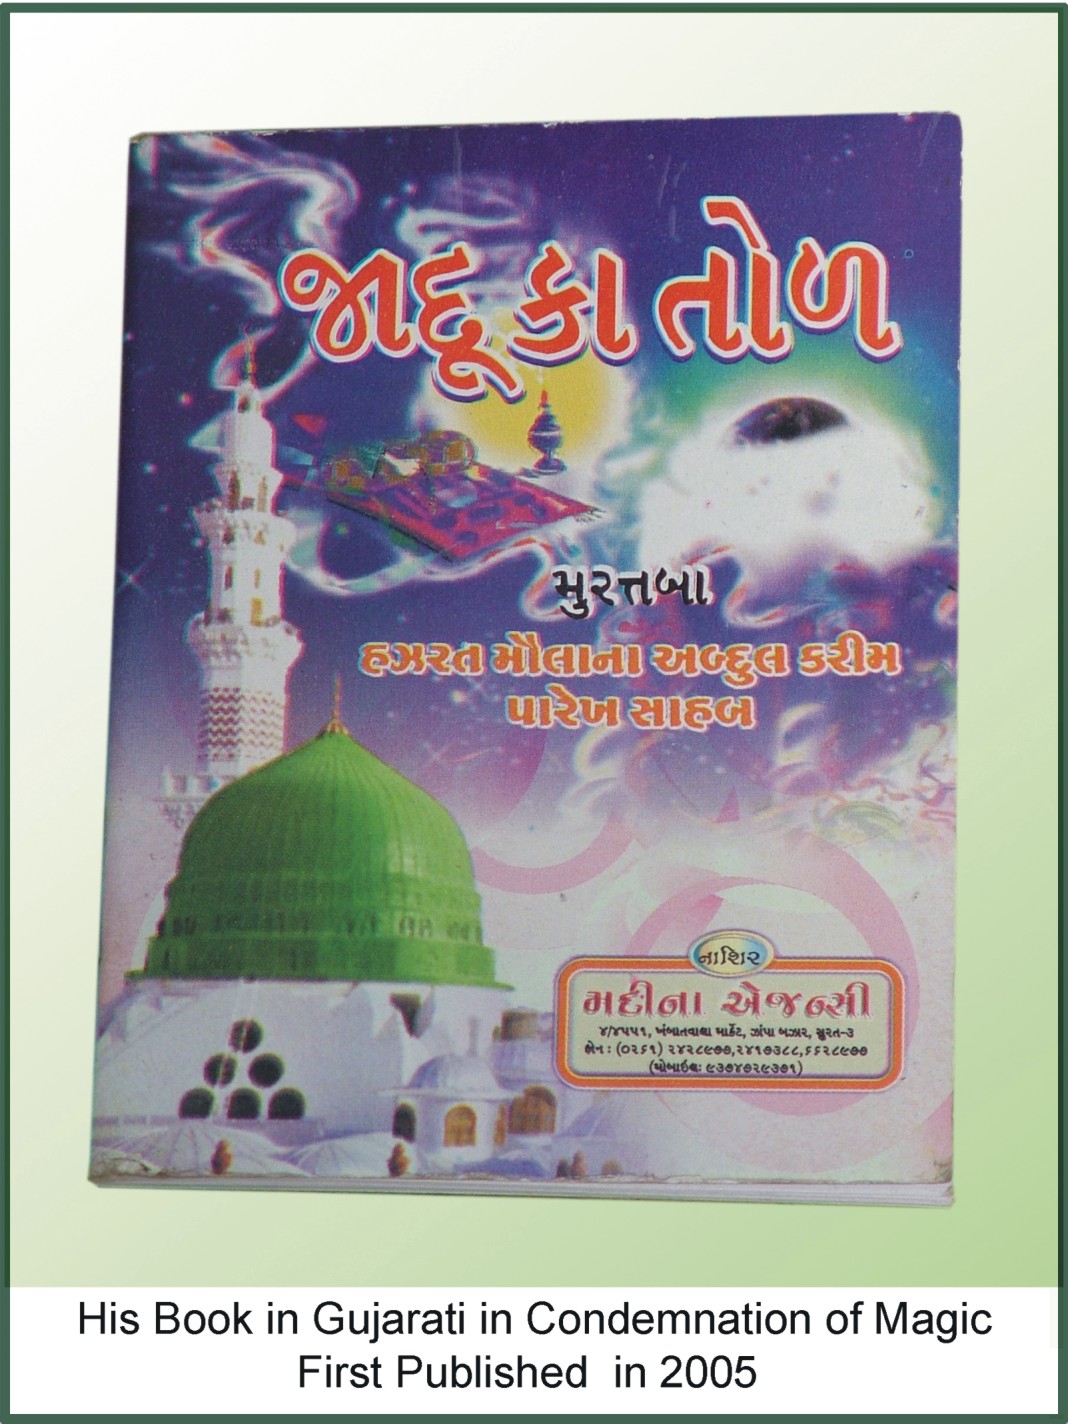 Condemnation of Magic (Gujarati) First Published in 2005